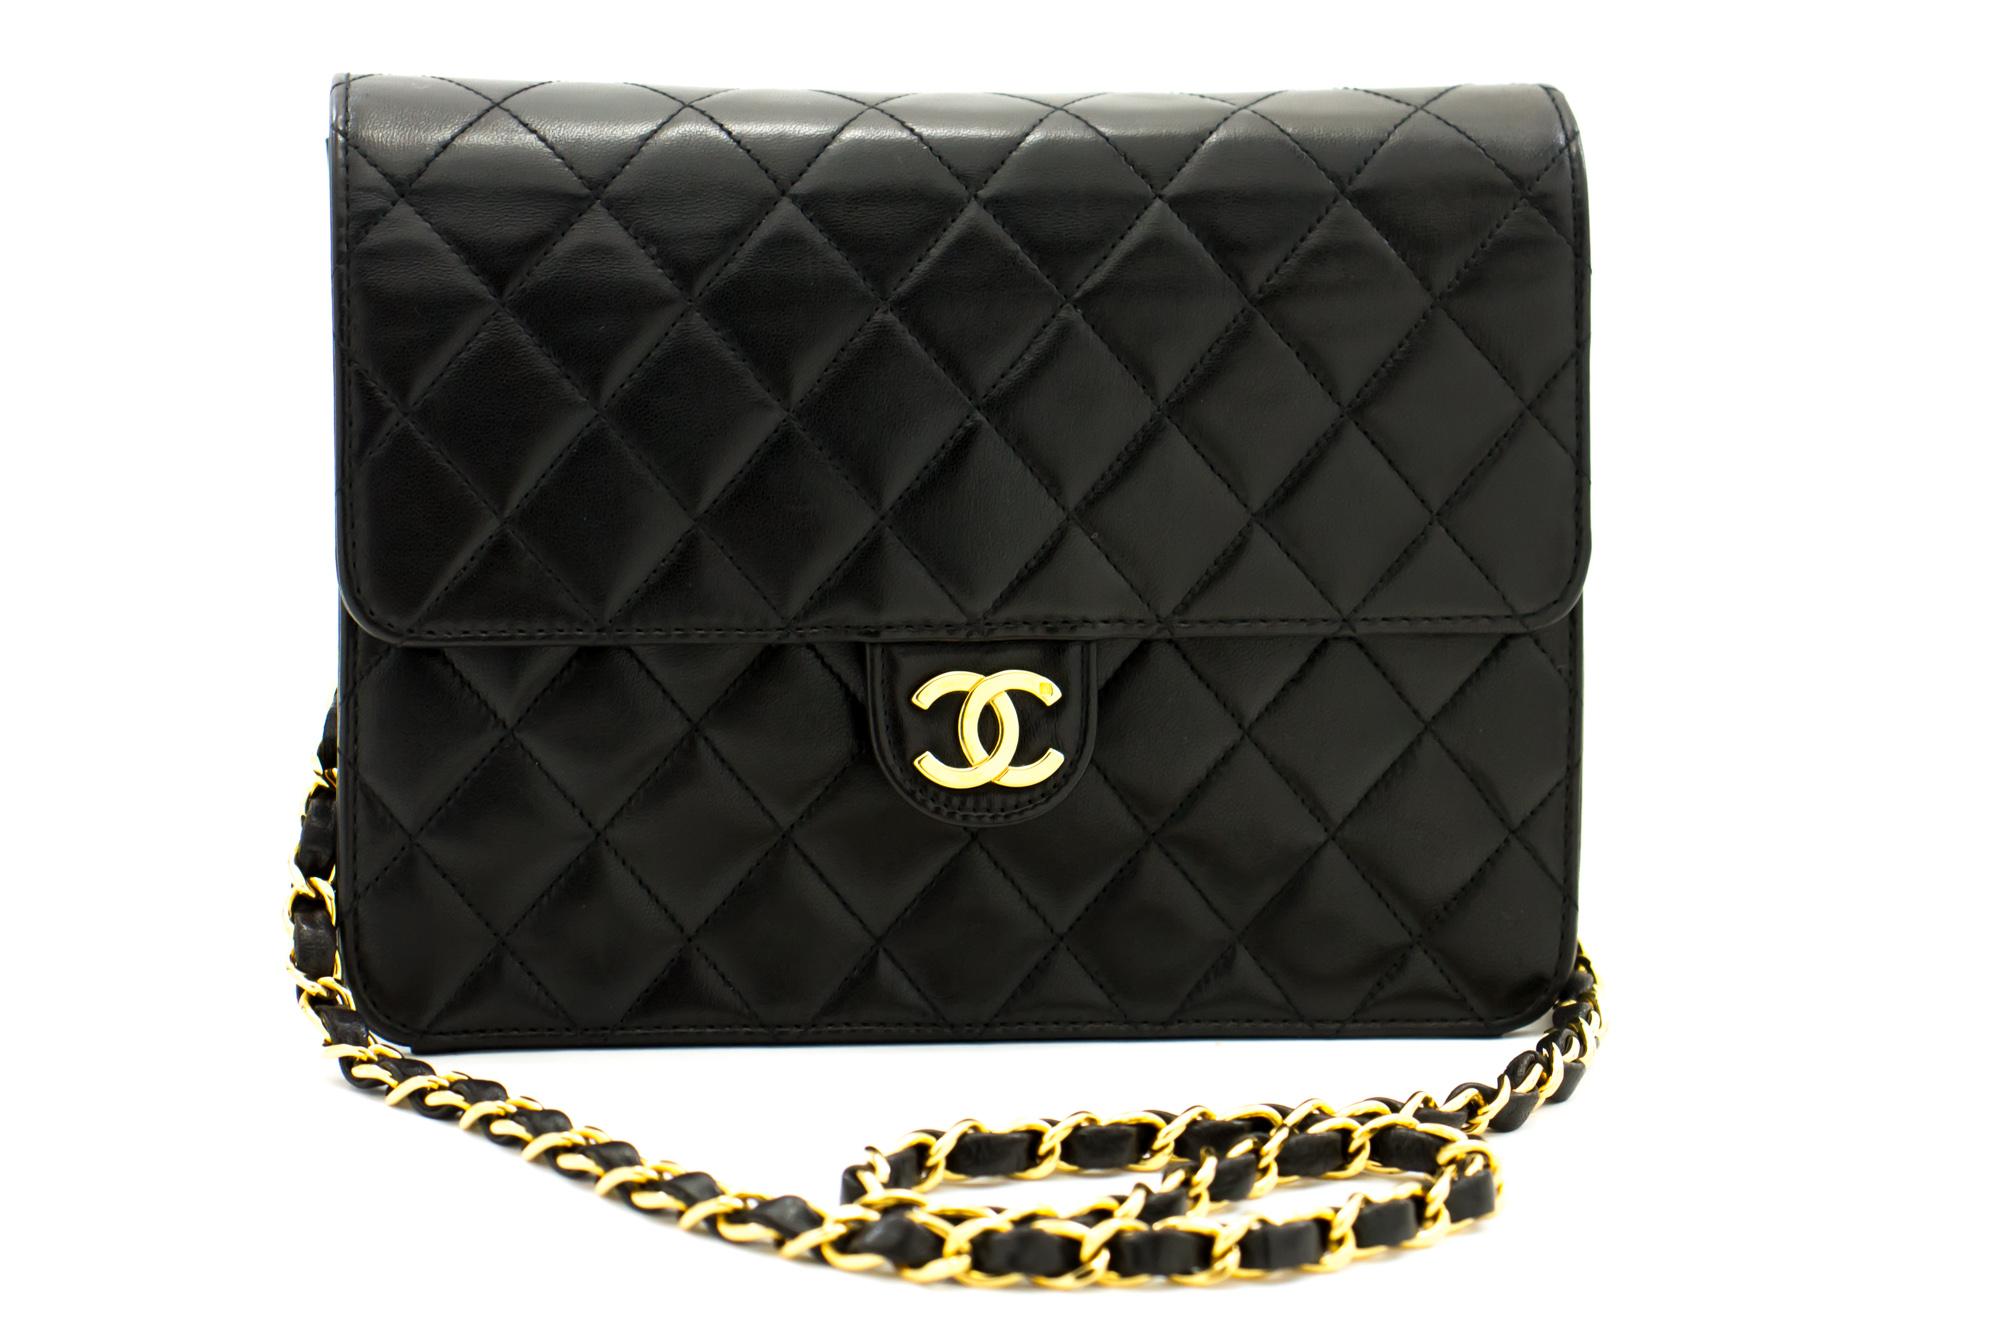 An authentic CHANEL Small Chain Shoulder Bag Clutch Black Quilted Flap made of black Lambskin. The color is Black. The outside material is Leather. The pattern is Solid. This item is Vintage / Classic. The year of manufacture would be